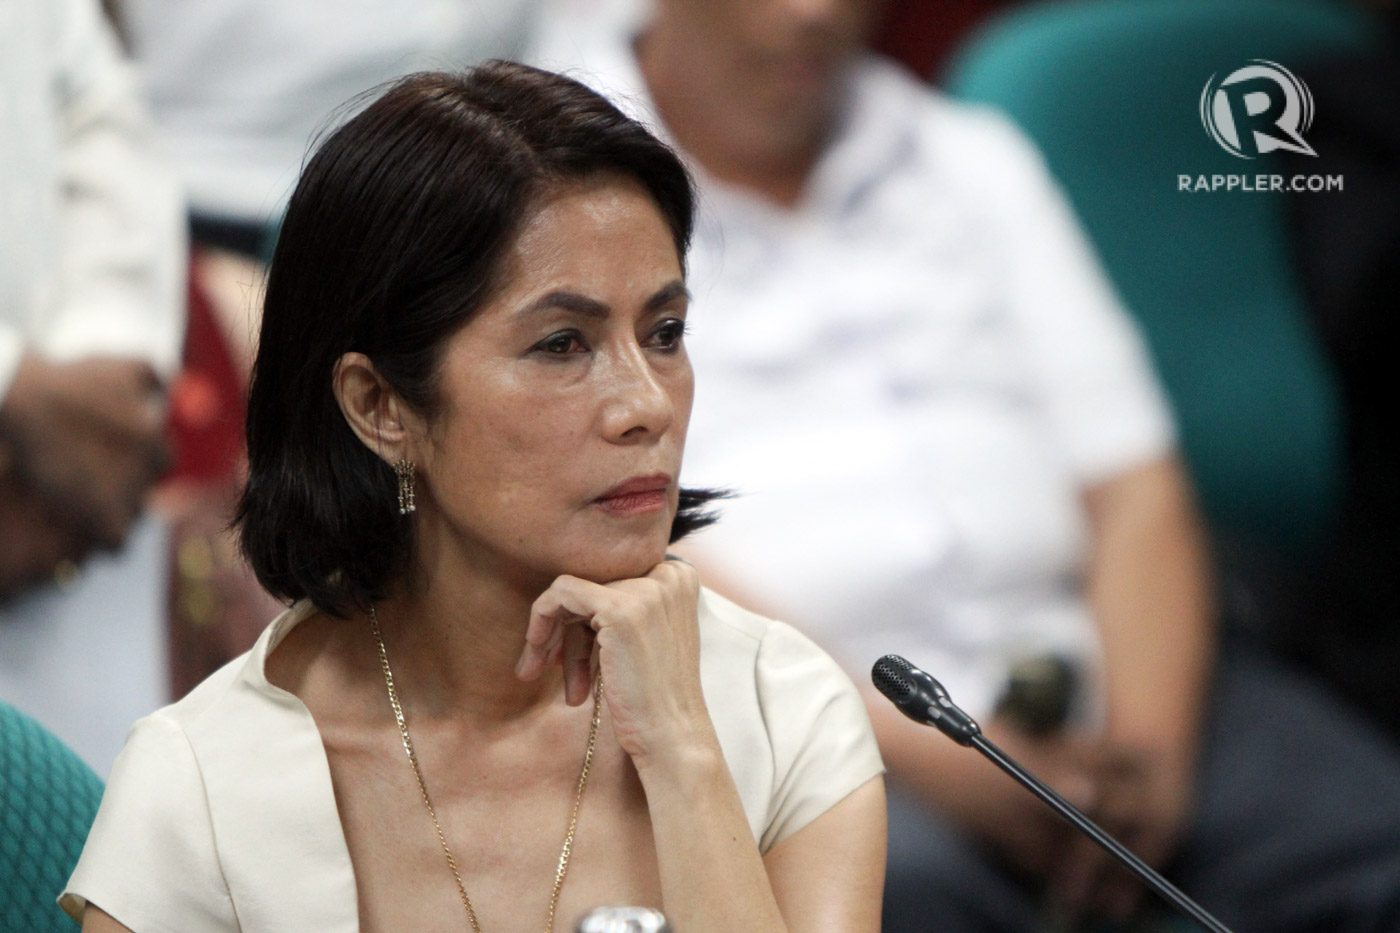 Environmental groups mourn death of ‘eco-warrior’ Gina Lopez